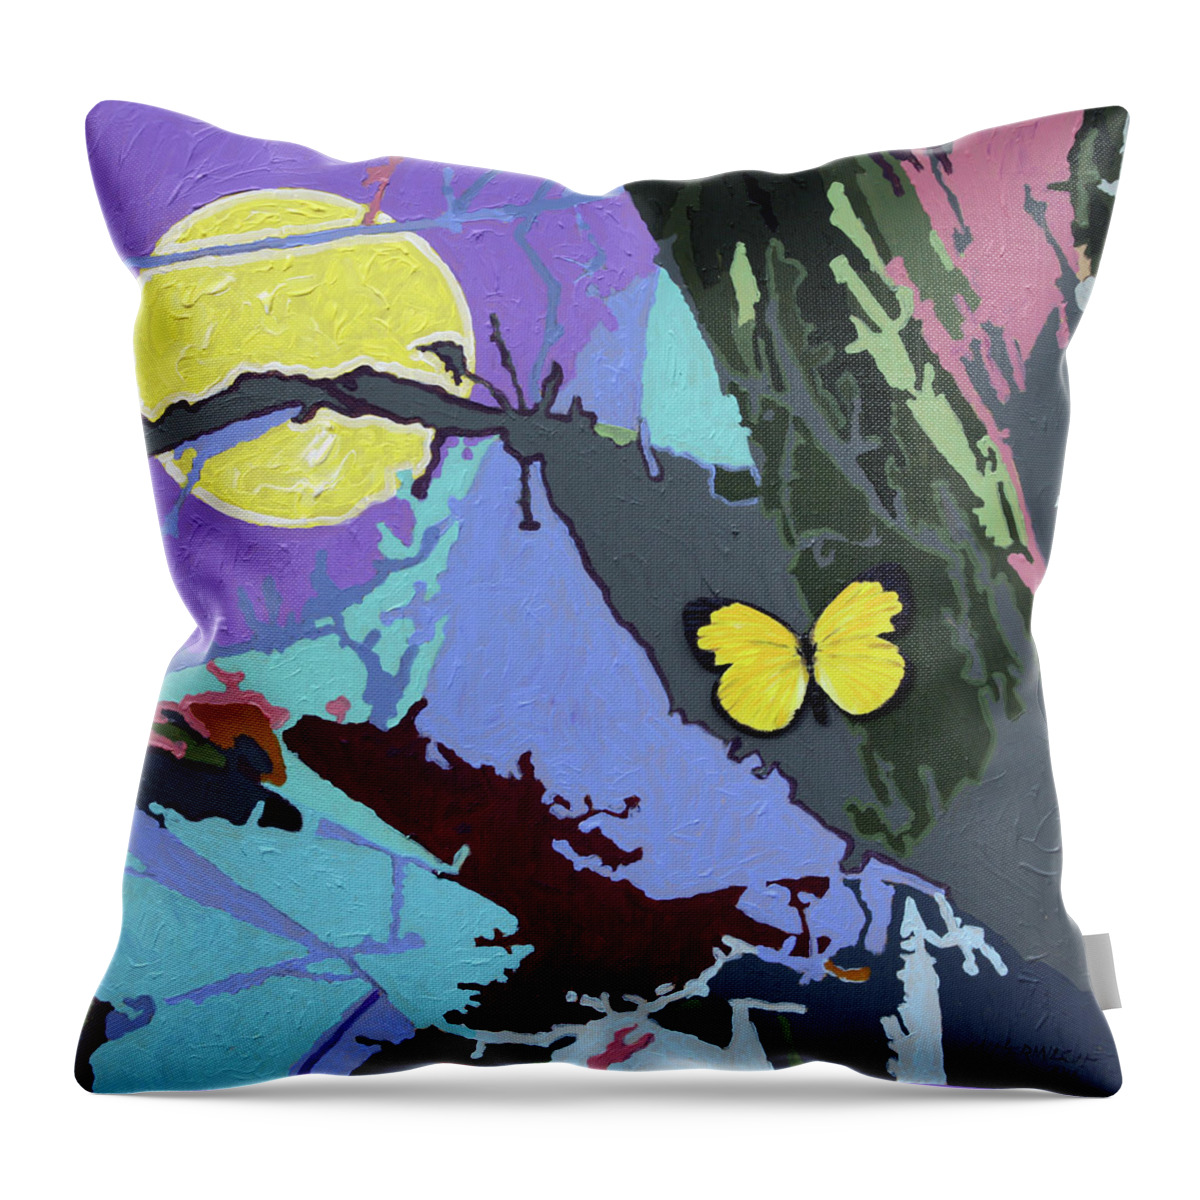 Moon Throw Pillow featuring the painting Harvest Moon Flight by John Lautermilch